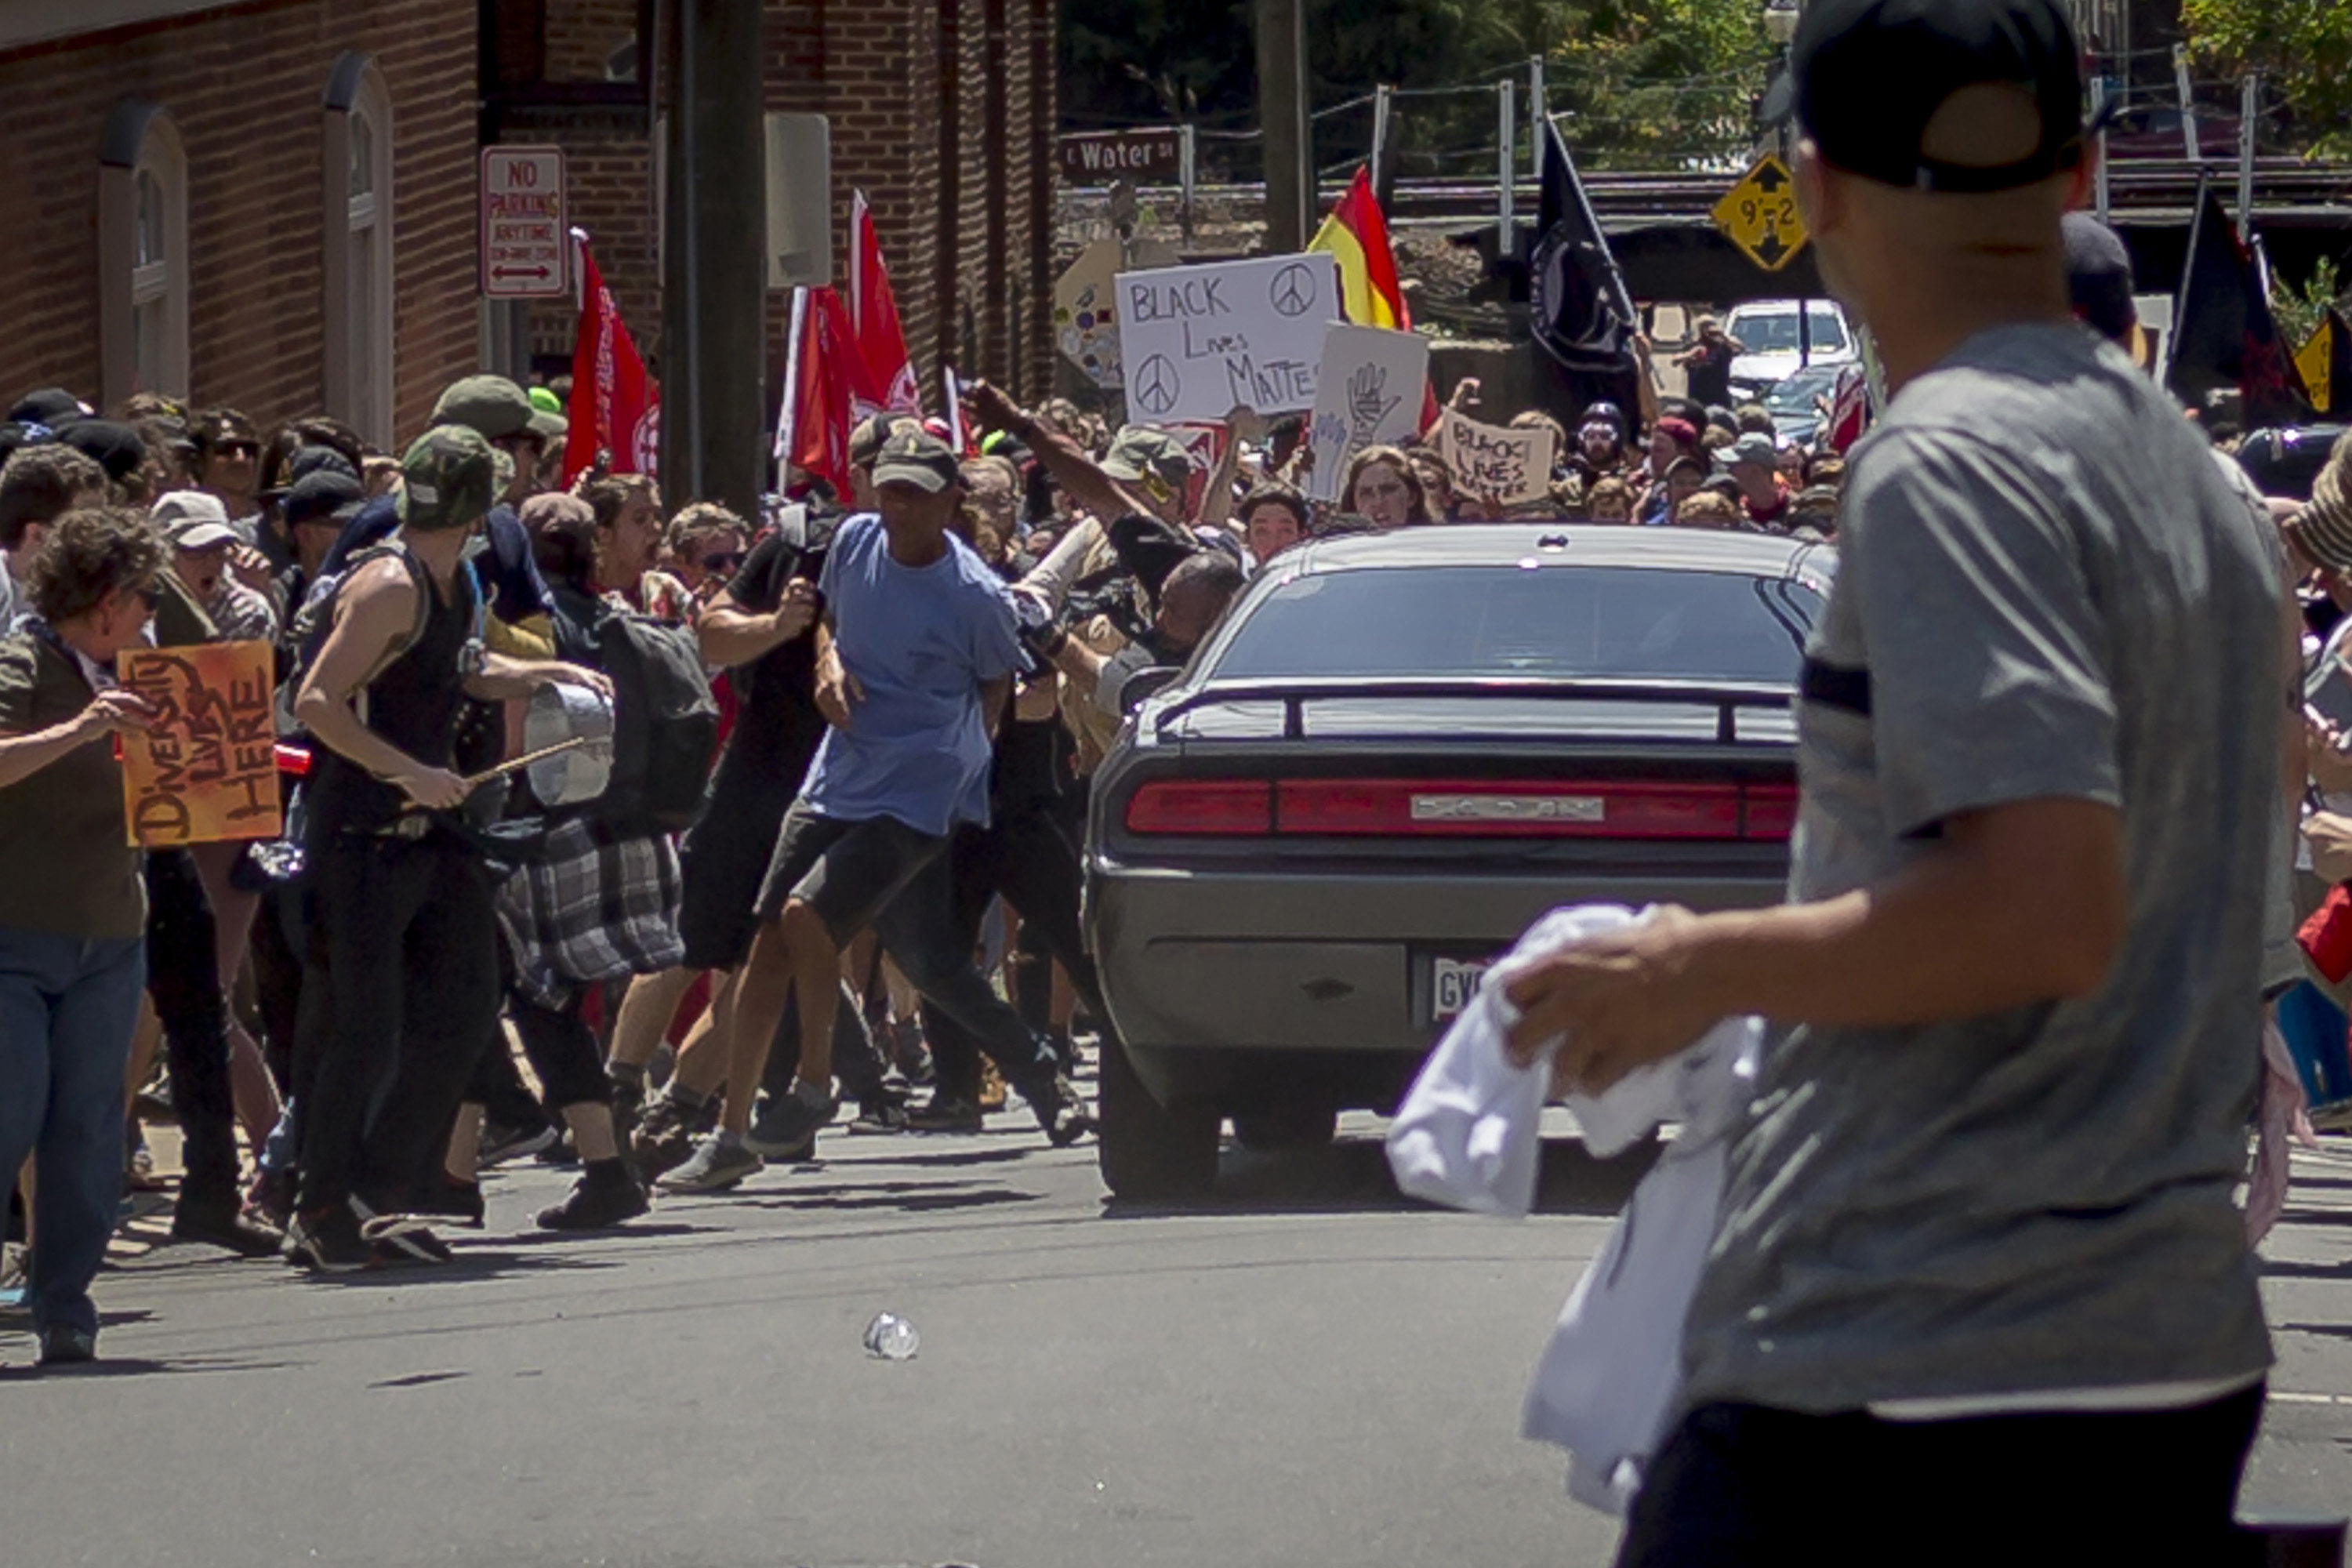 White supremacist groups clash with US counter-protesters during the ‘Unite the Right’ rally in Charlottesville, Virginia in 2017. Photo: TNS